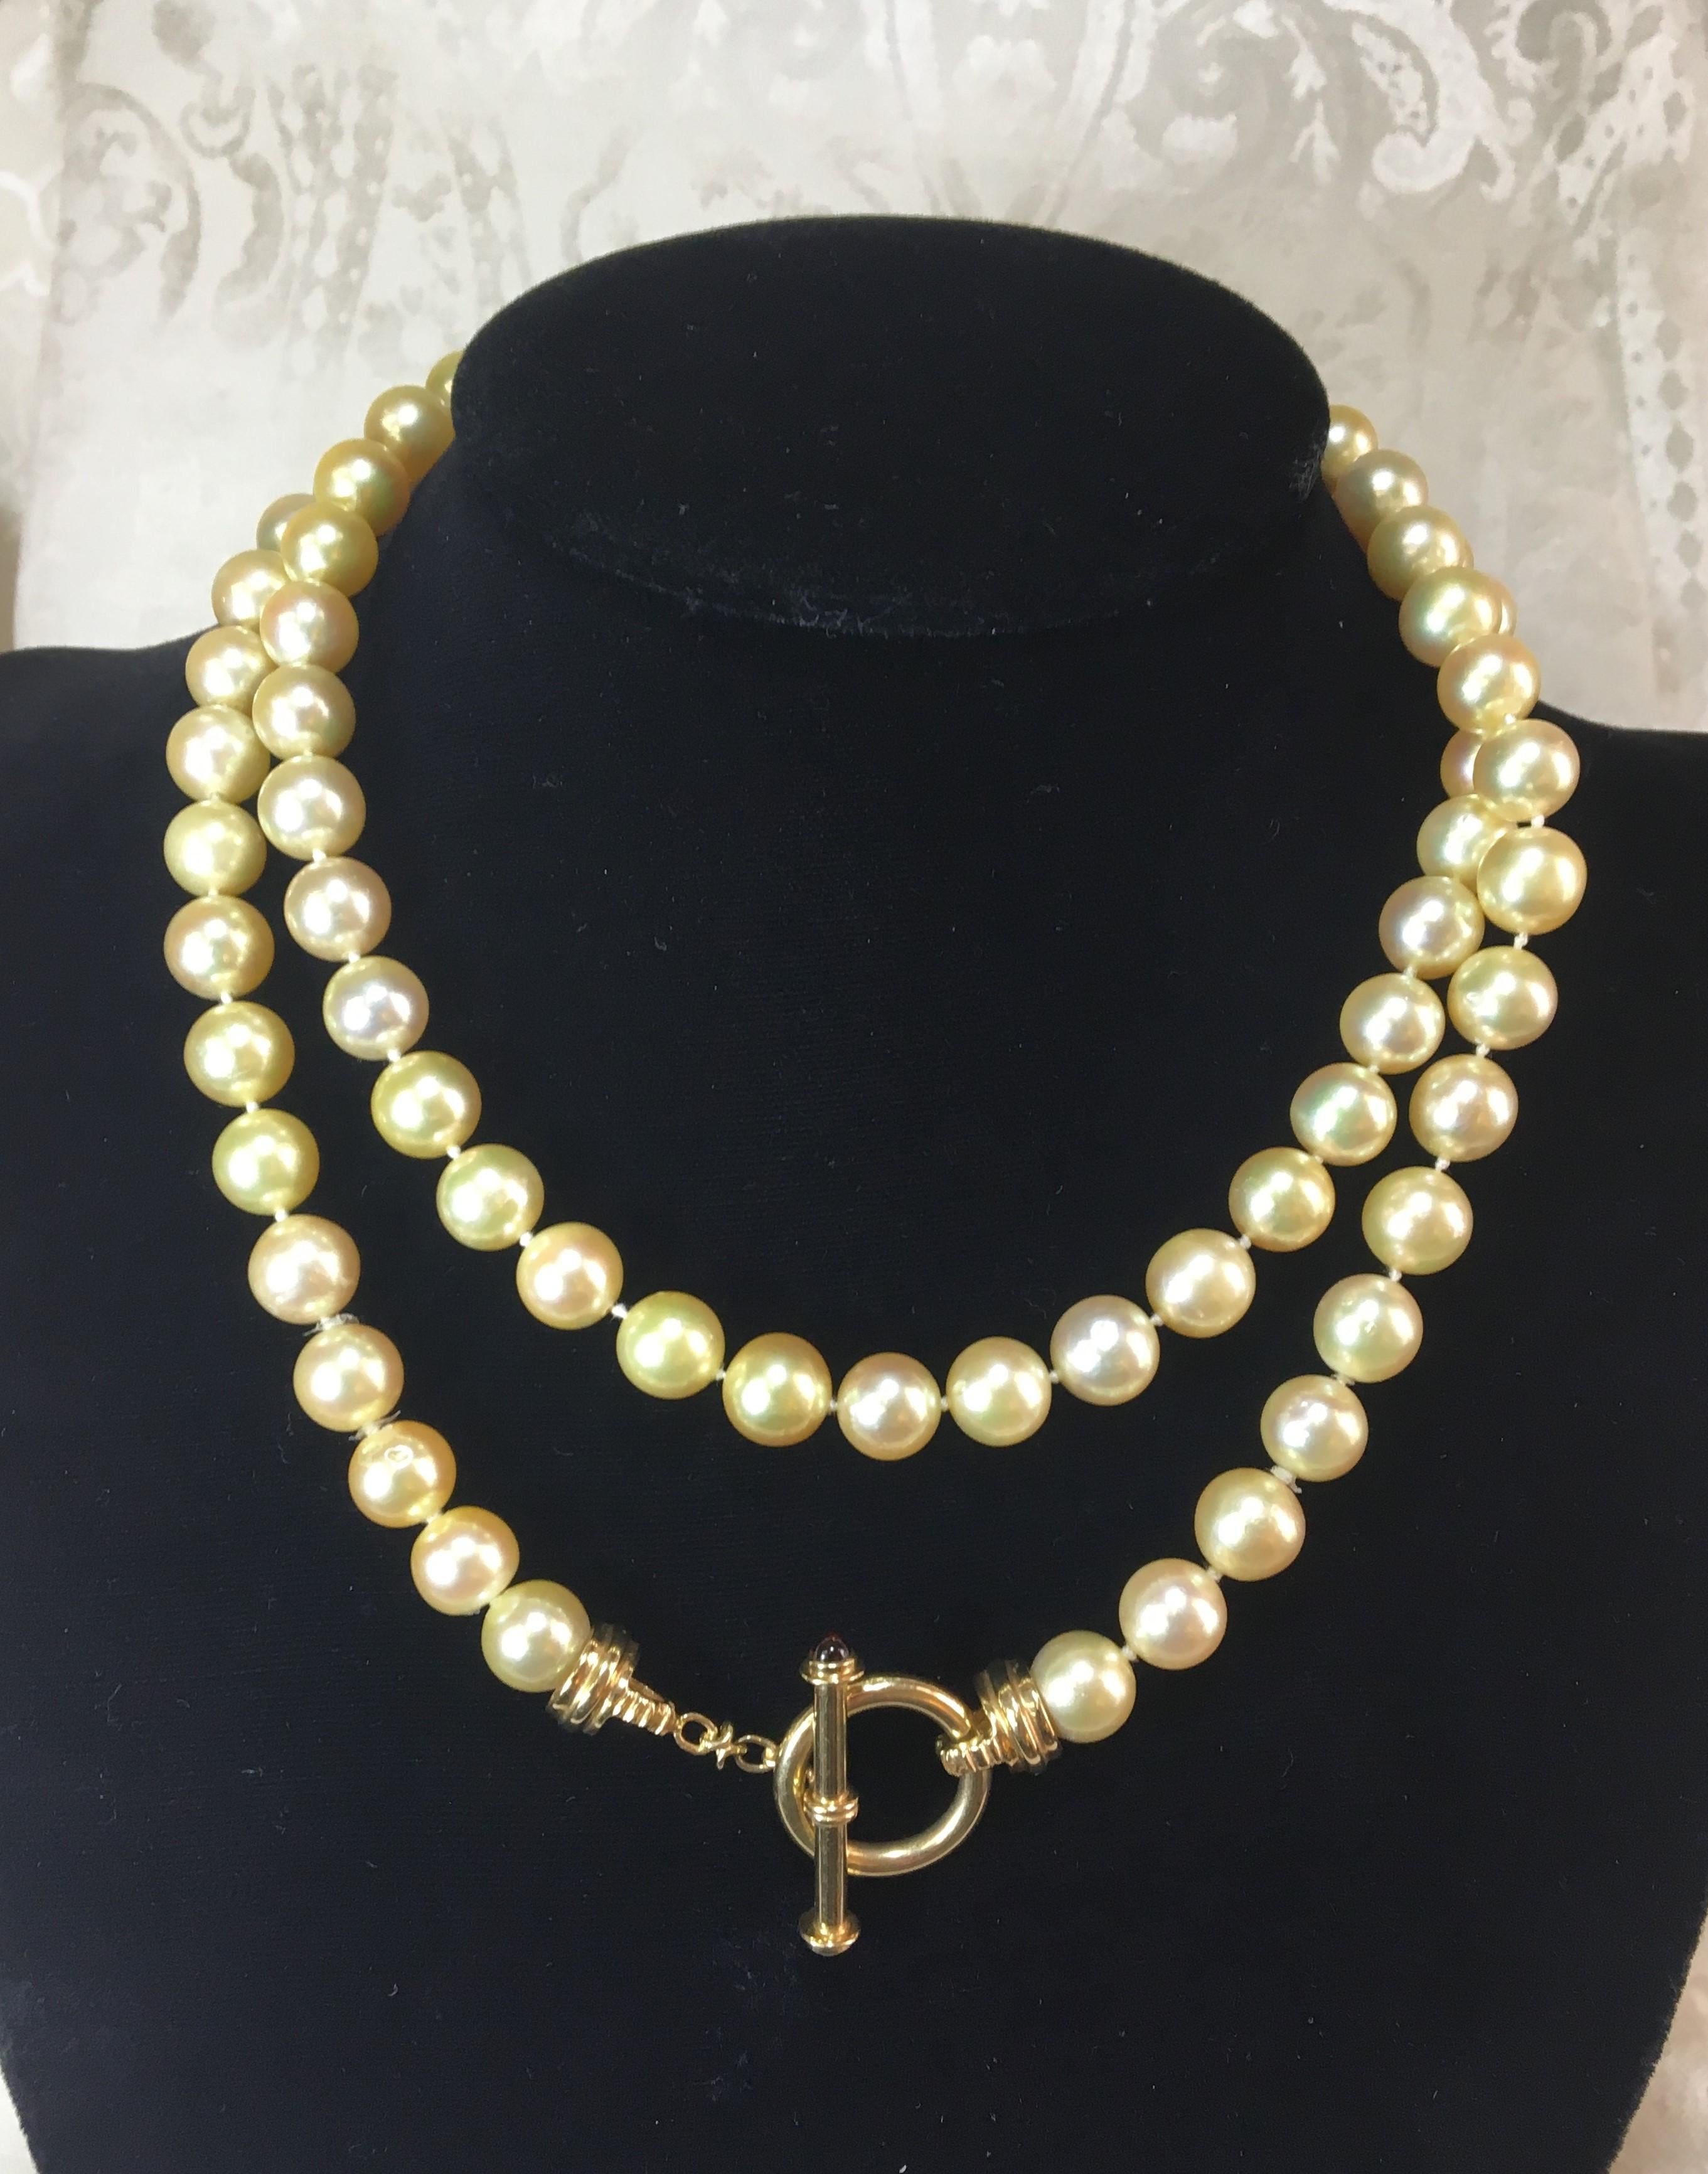 80 Golden Color Pearls, Round
Approximately 9.5 - 10mm pearls
34 inch rope length
14K yellow gold Toggle Clasp
Two Cabochon Stones in toggle
